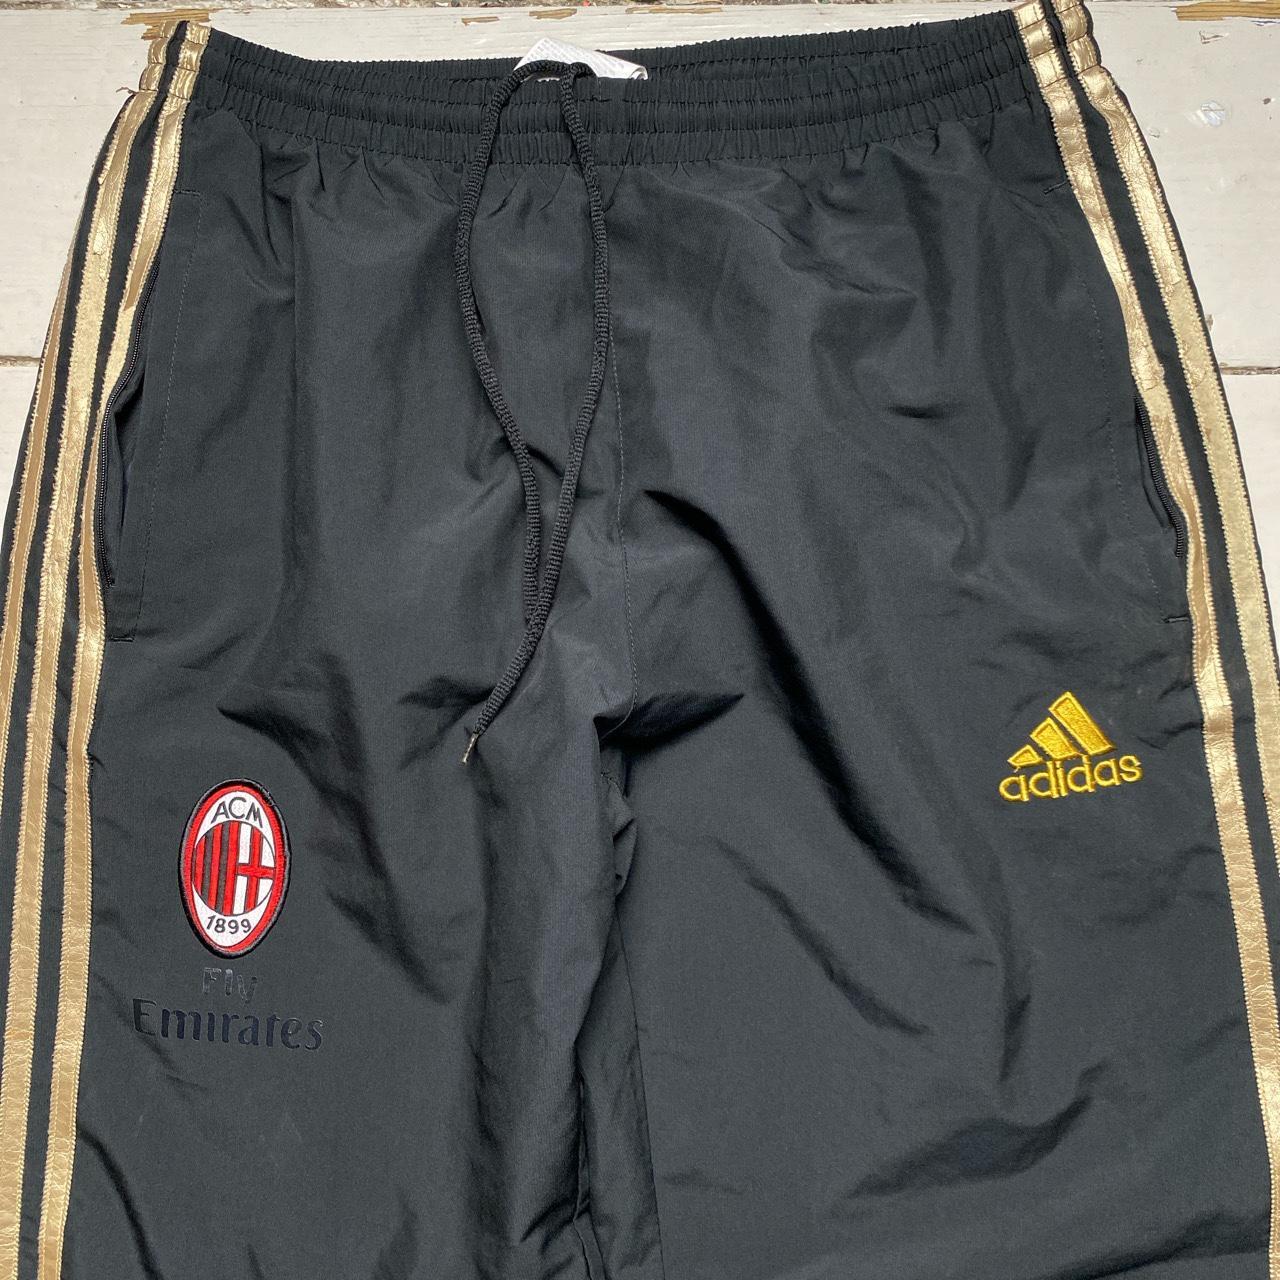 AC Milan Football Vintage Black Gold and Red Shell Tracksuit